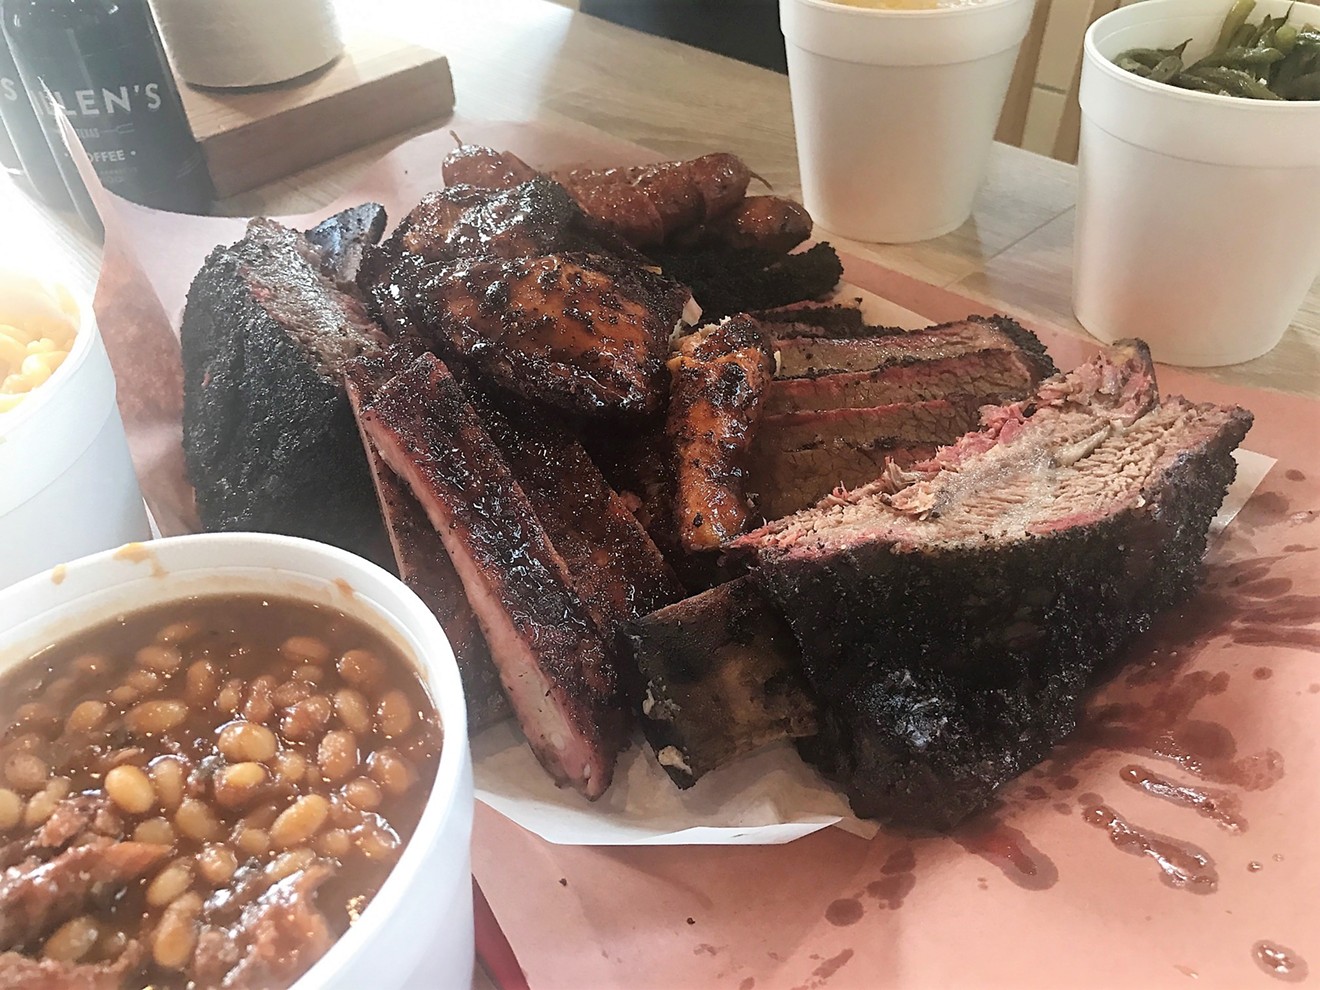 An epic meat tray at Killen's Barbecue with brontosaurus-sized beef ribs, fatty and lean brisket, pork ribs, sausage and chicken.